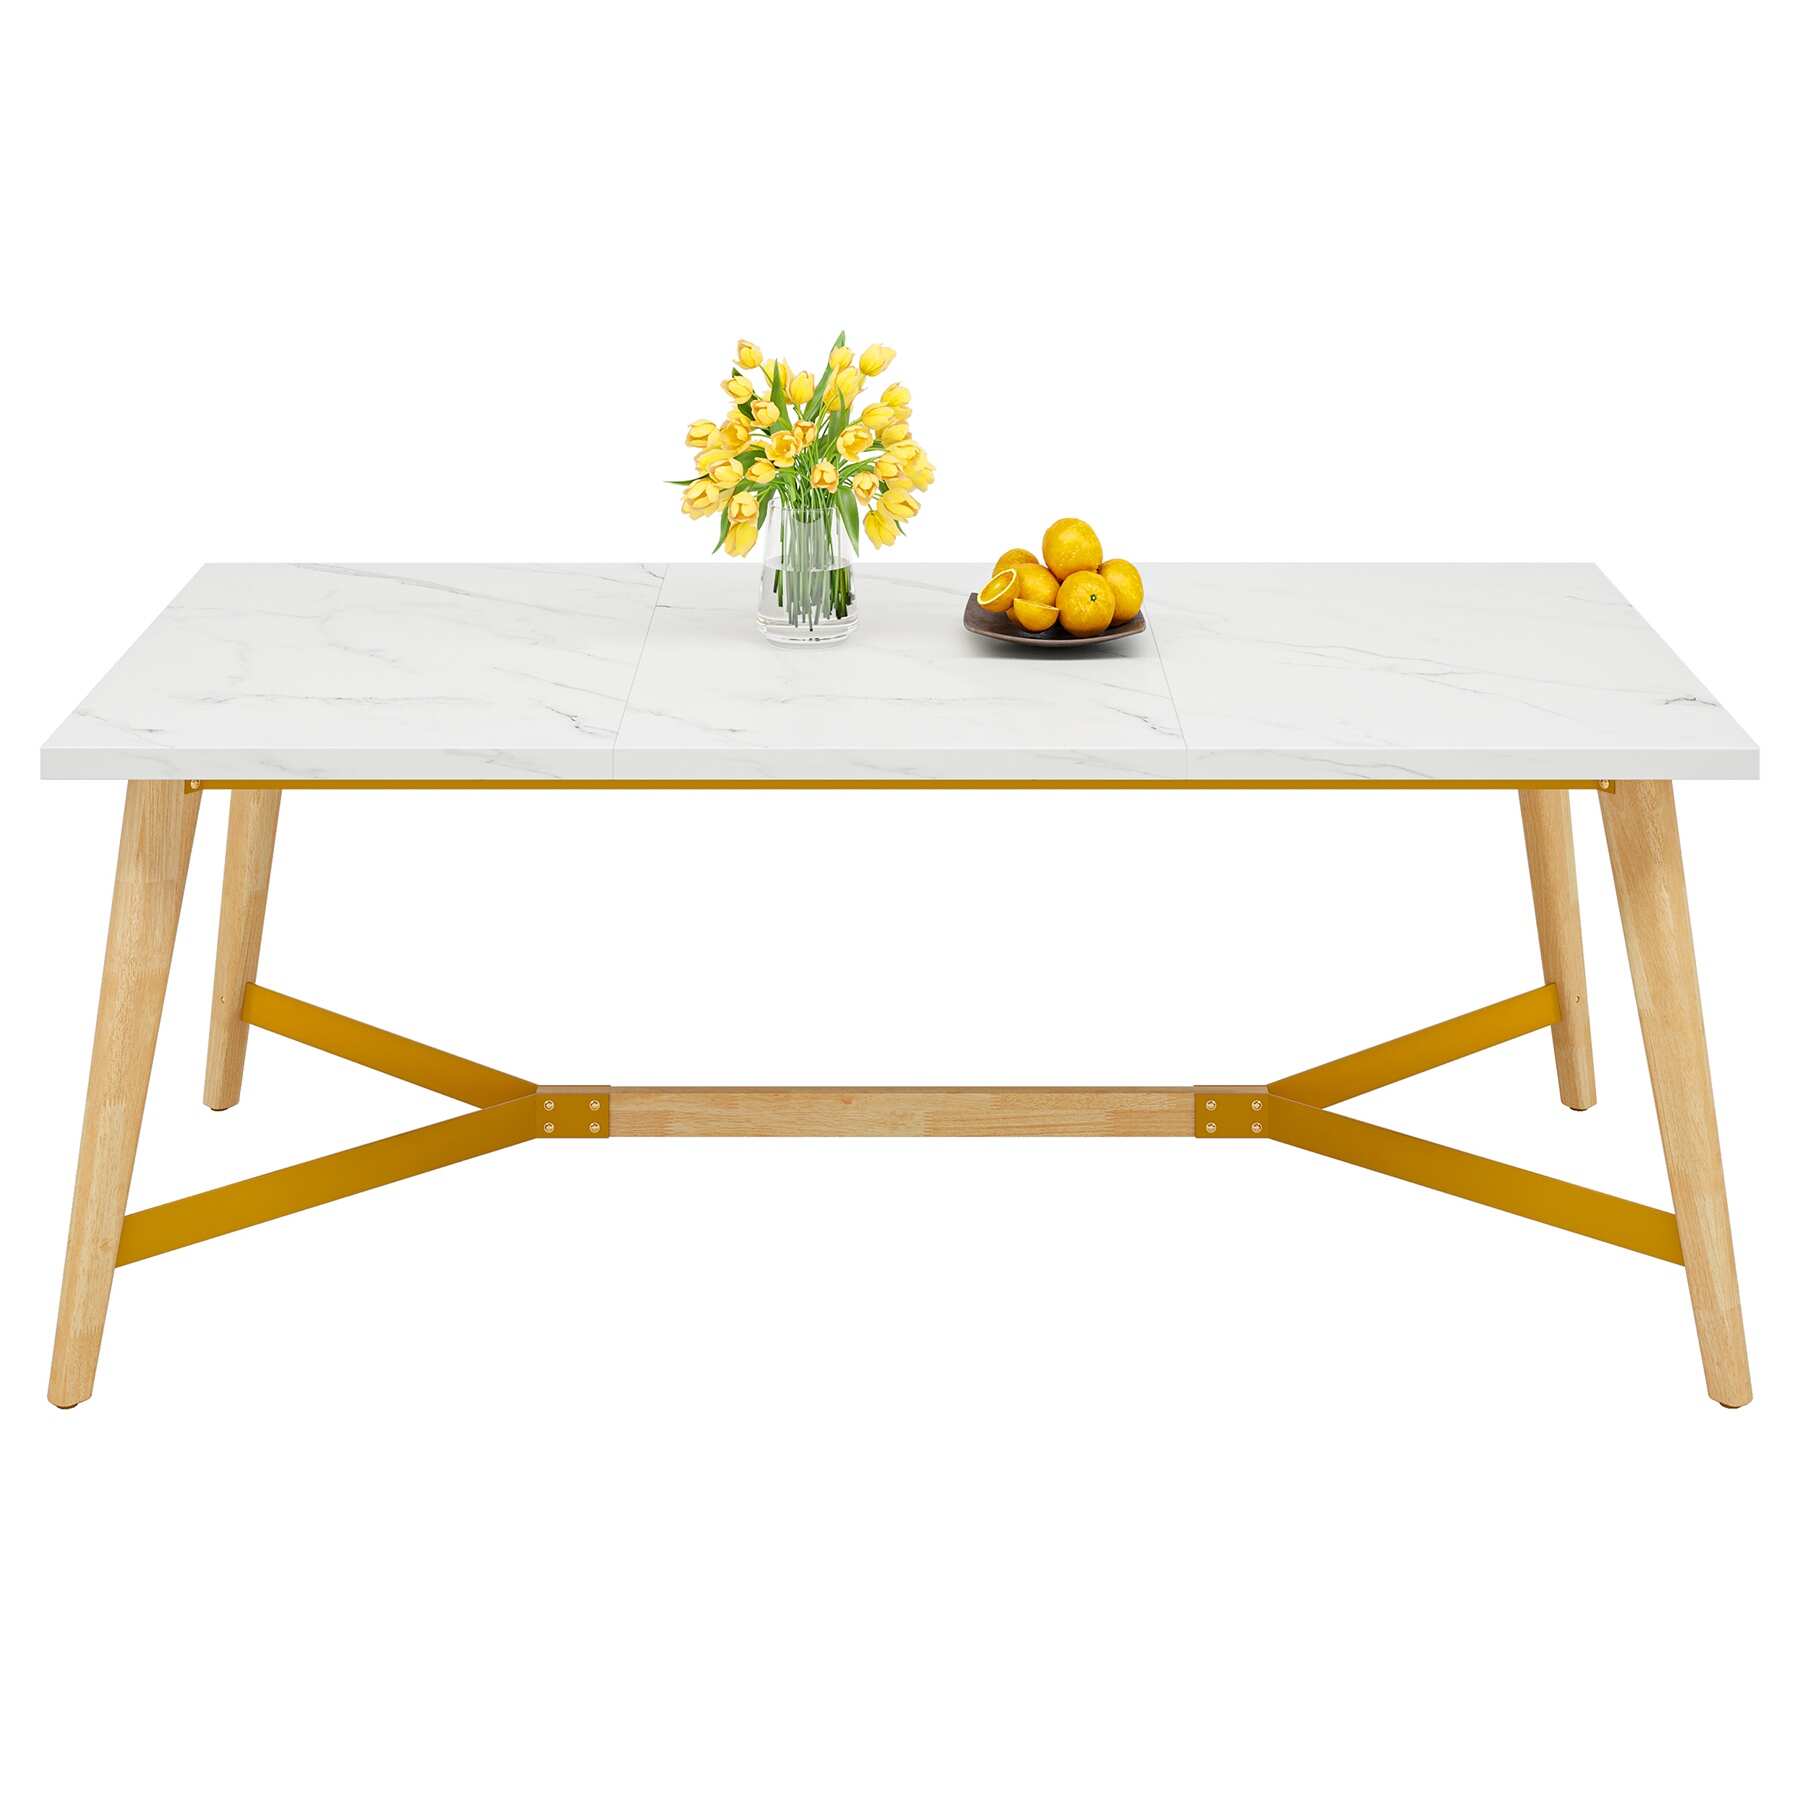 Dining Table for 6-8 People, 70.9-inch Rectangular Kitchen Table